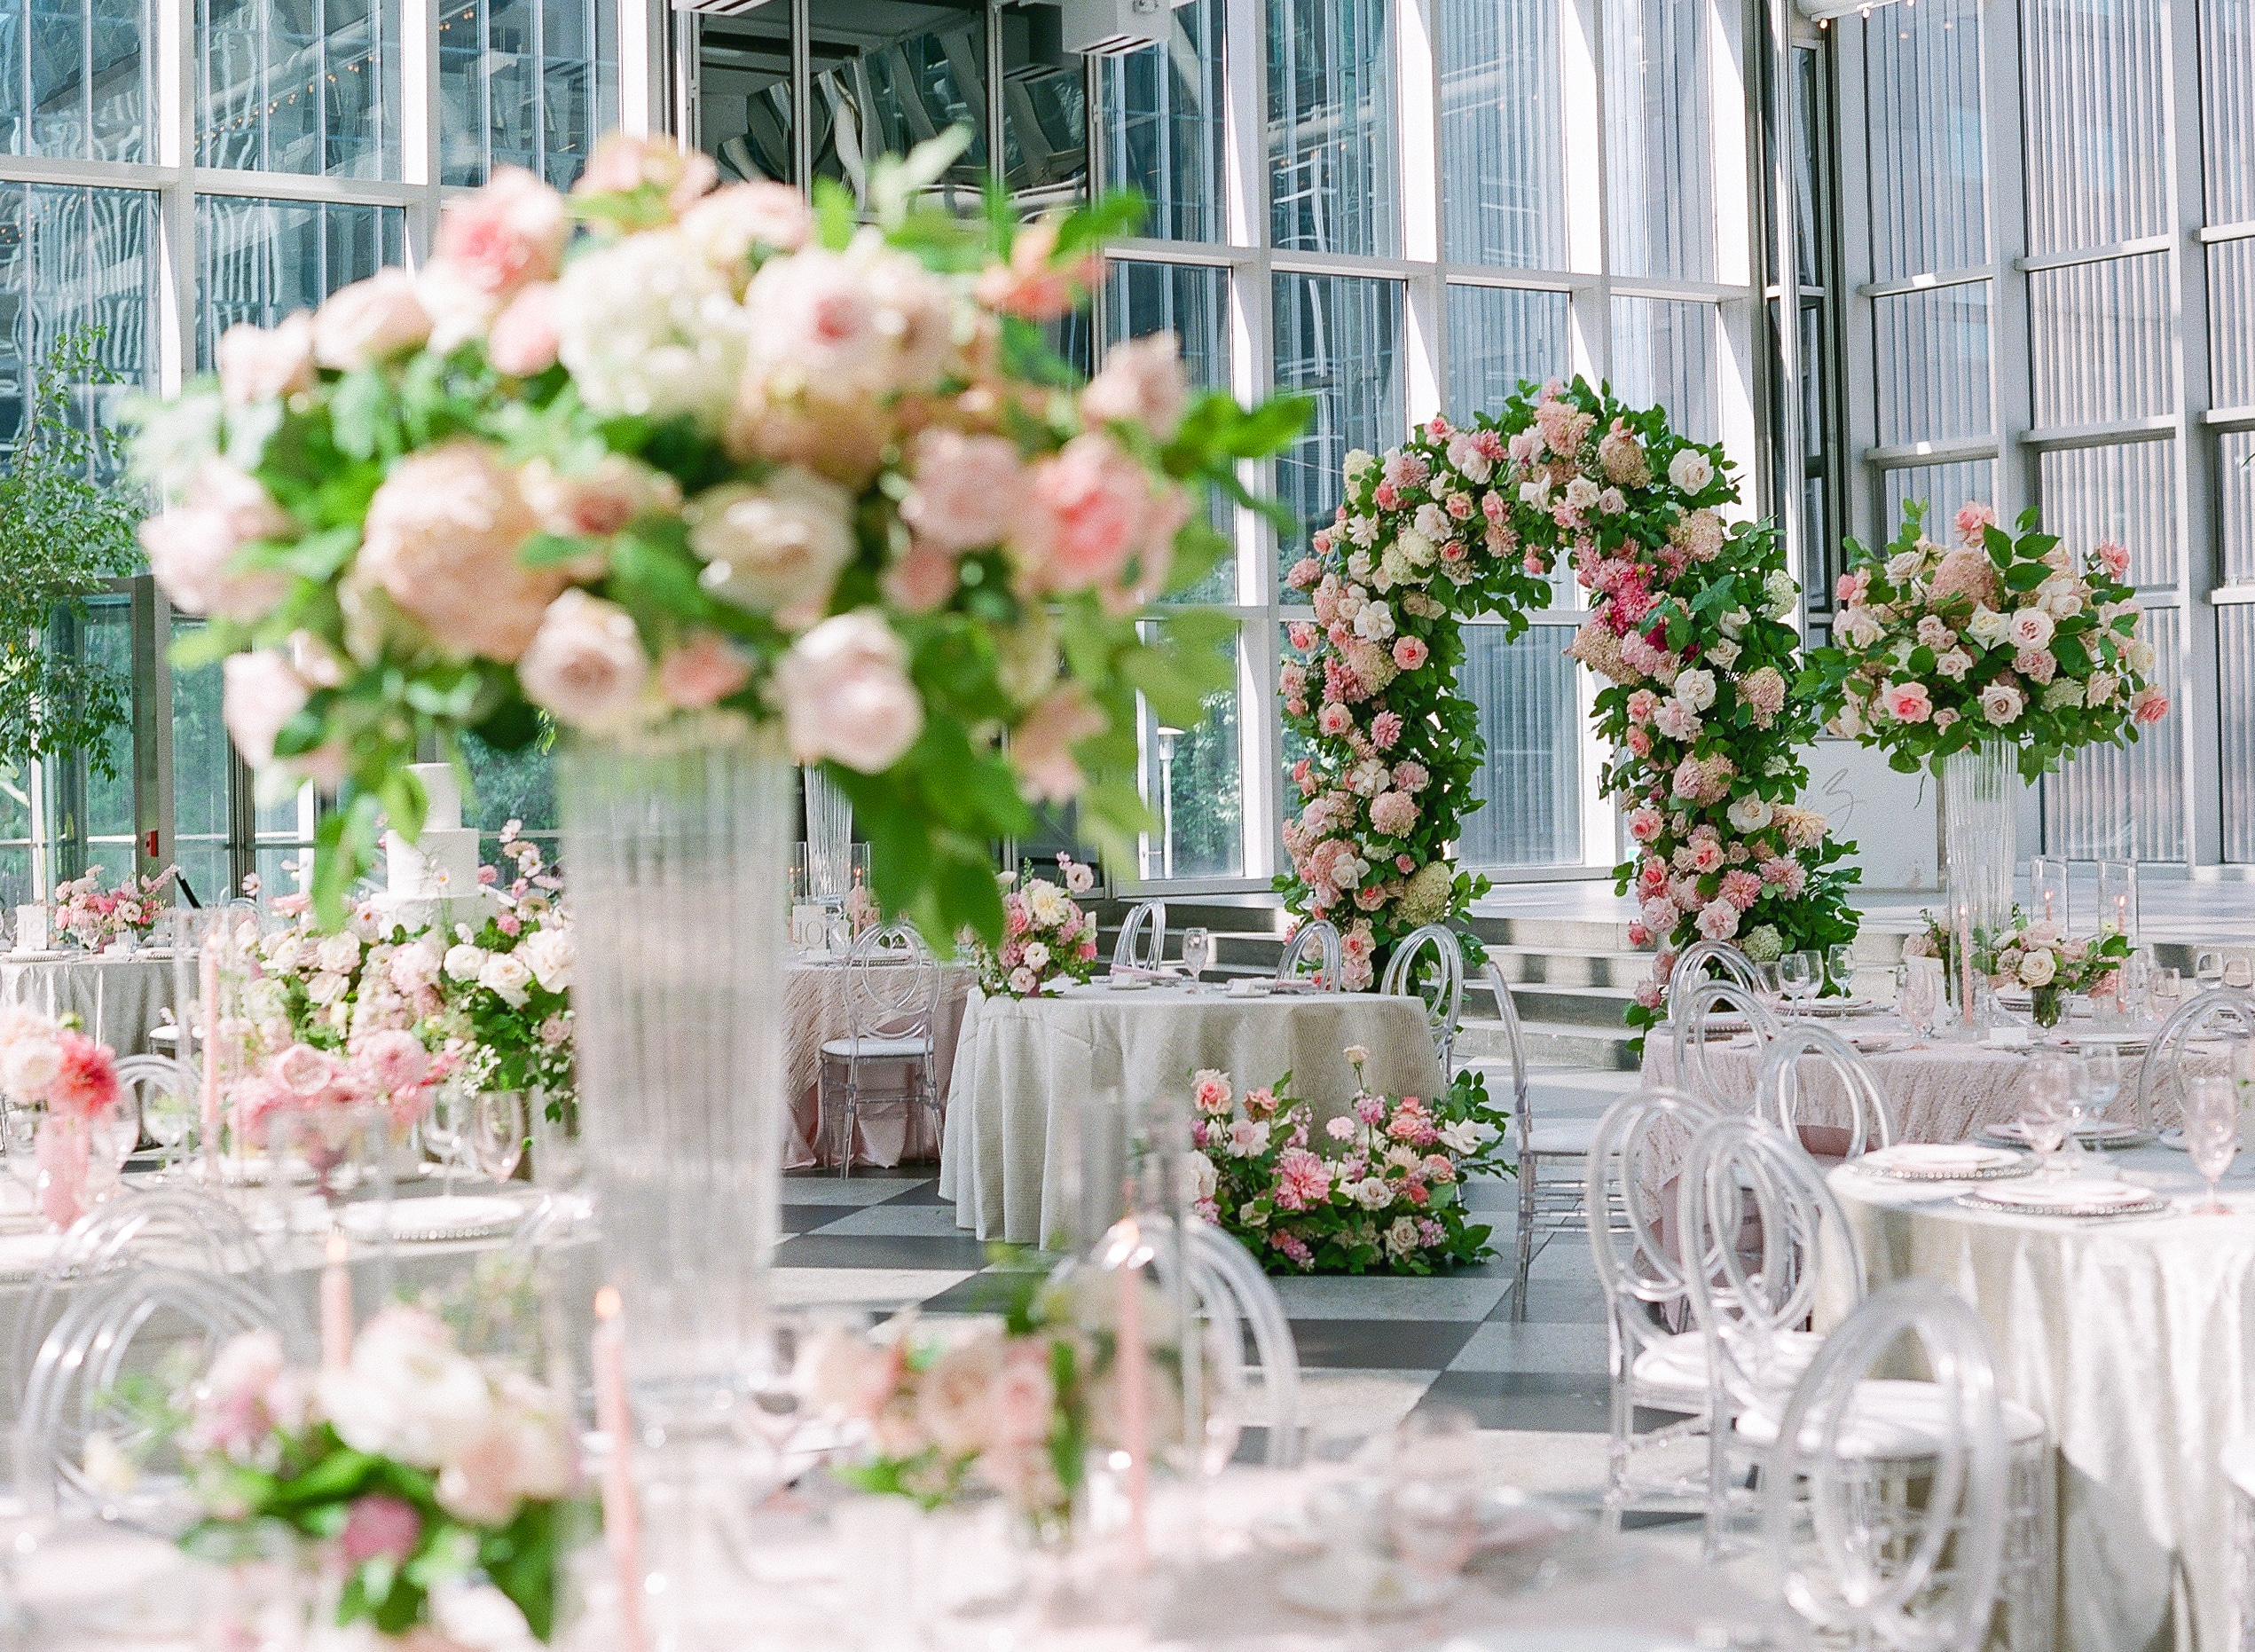 A photo of spring flowers set for a wedding at PPG Plaza.